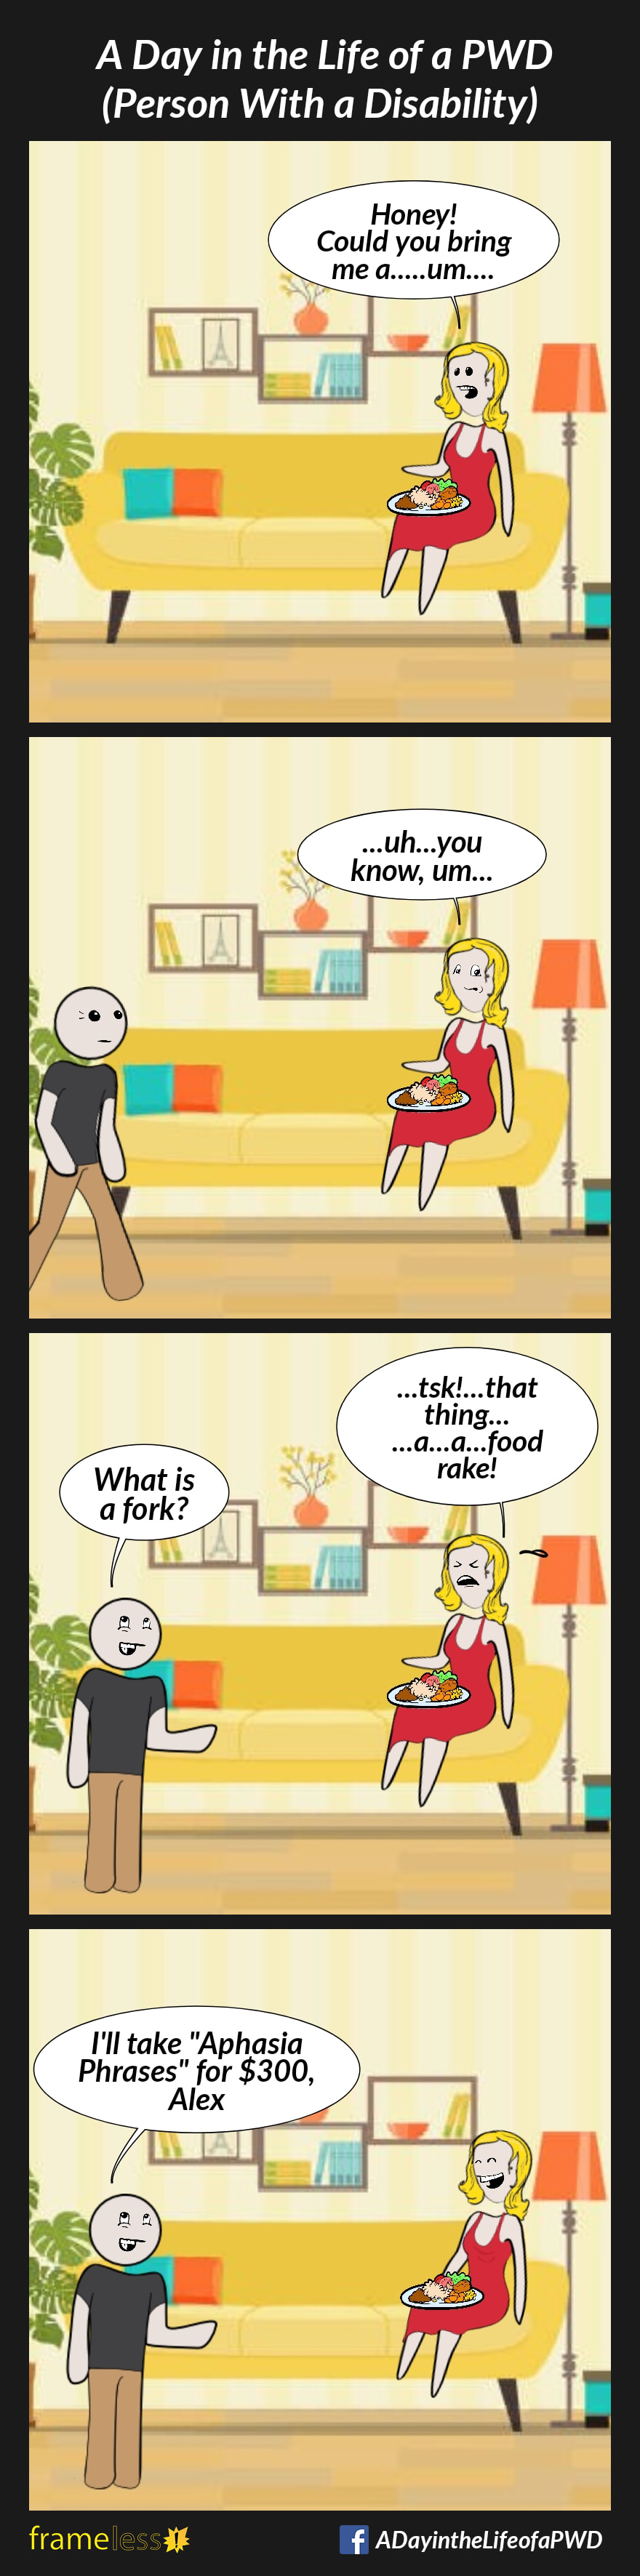 COMIC STRIP 
A Day in the Life of a PWD (Person With a Disability) 

Frame 1:
A woman sits on a sofa with a pkate of food on her lap.
WOMAN: Honey! Could you bring me a...um...

Frame 2:
A man enters.
WOMAN: ...uh...you know, um...

Frame 3:
WOMAN (frustrated): ...task!...that thing...a...a food rake!
MAN: What is a fork?

Frame 4:
MAN: I'll take 